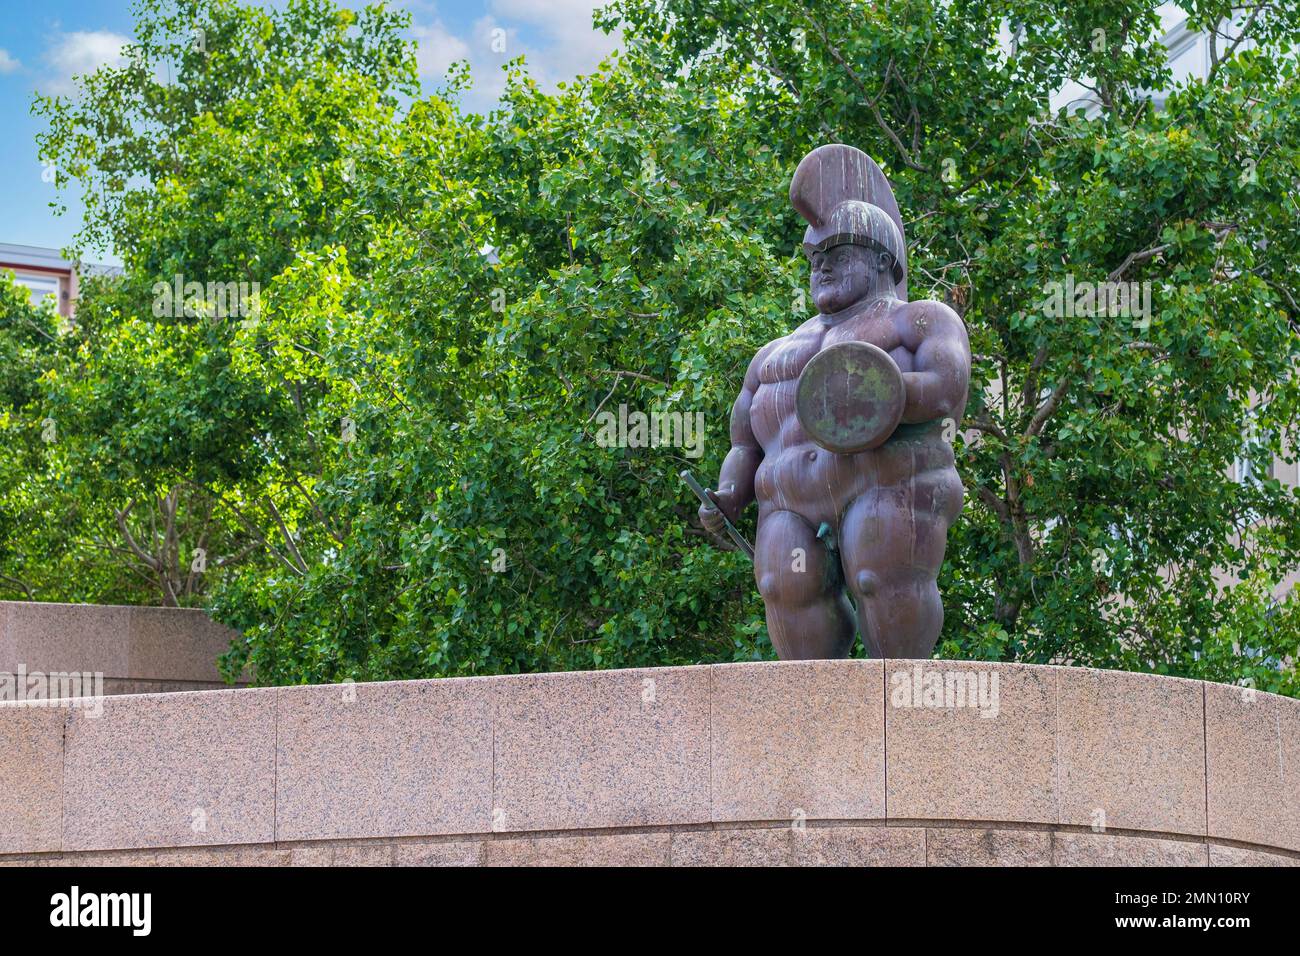 Spain, Galicia, A Coruña, bronze statue Roman Soldier by Fernando Botero in front of the House of Mankind or Domus by Japanese architect Arata Isozaki Stock Photo